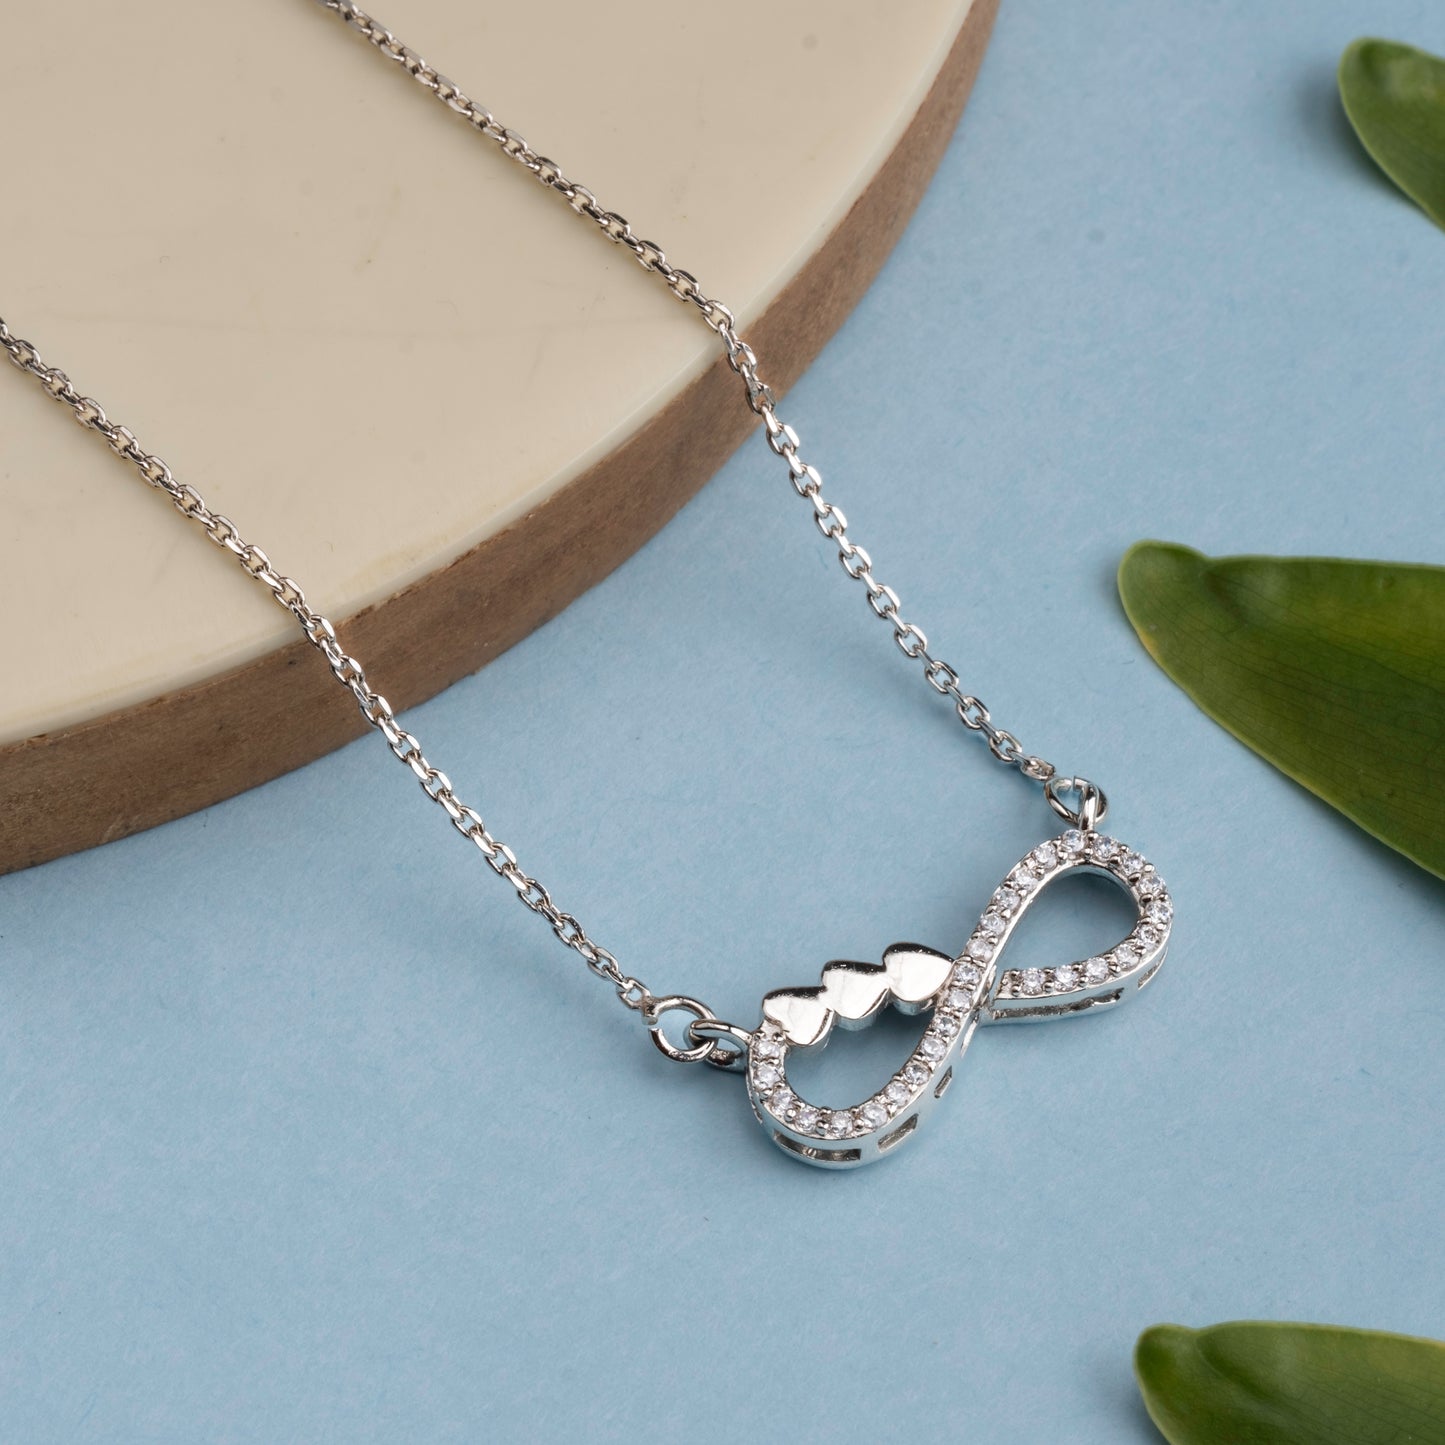 Infinity Heart Necklace - 925 Silver